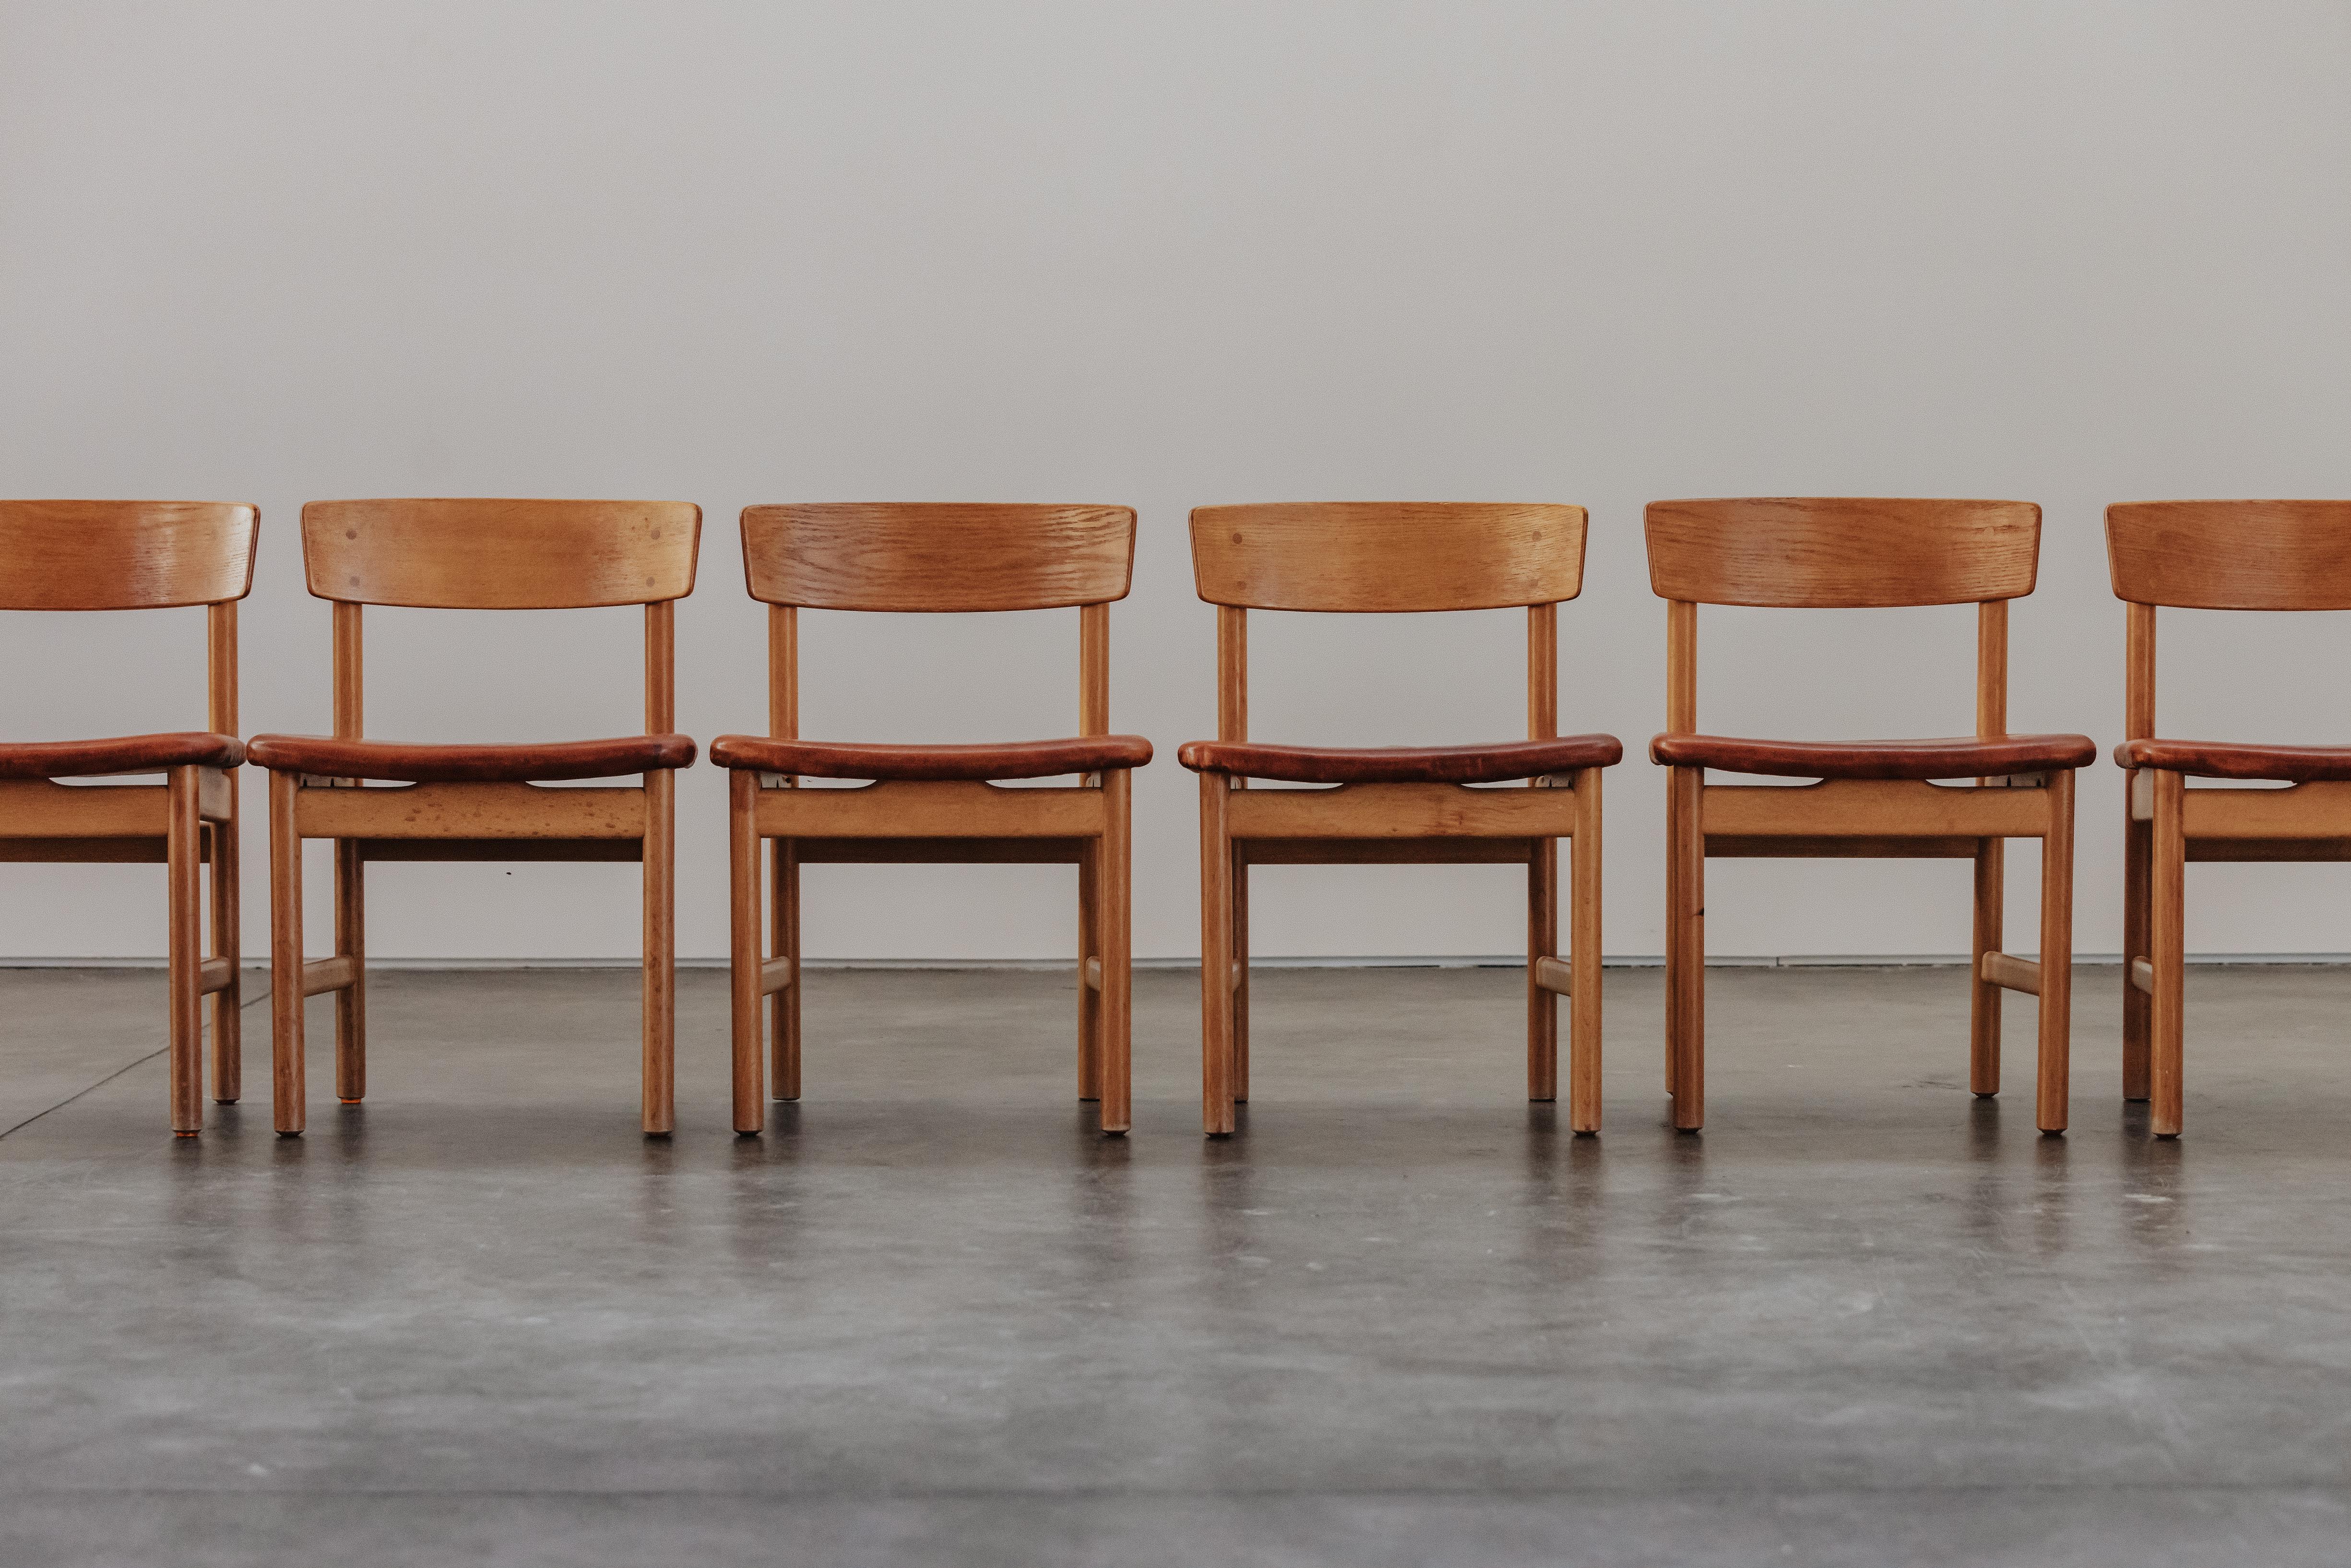 Vintage Set Of Borge Mogensen Dining Chairs From Denmark, Circa 1970 For Sale 1